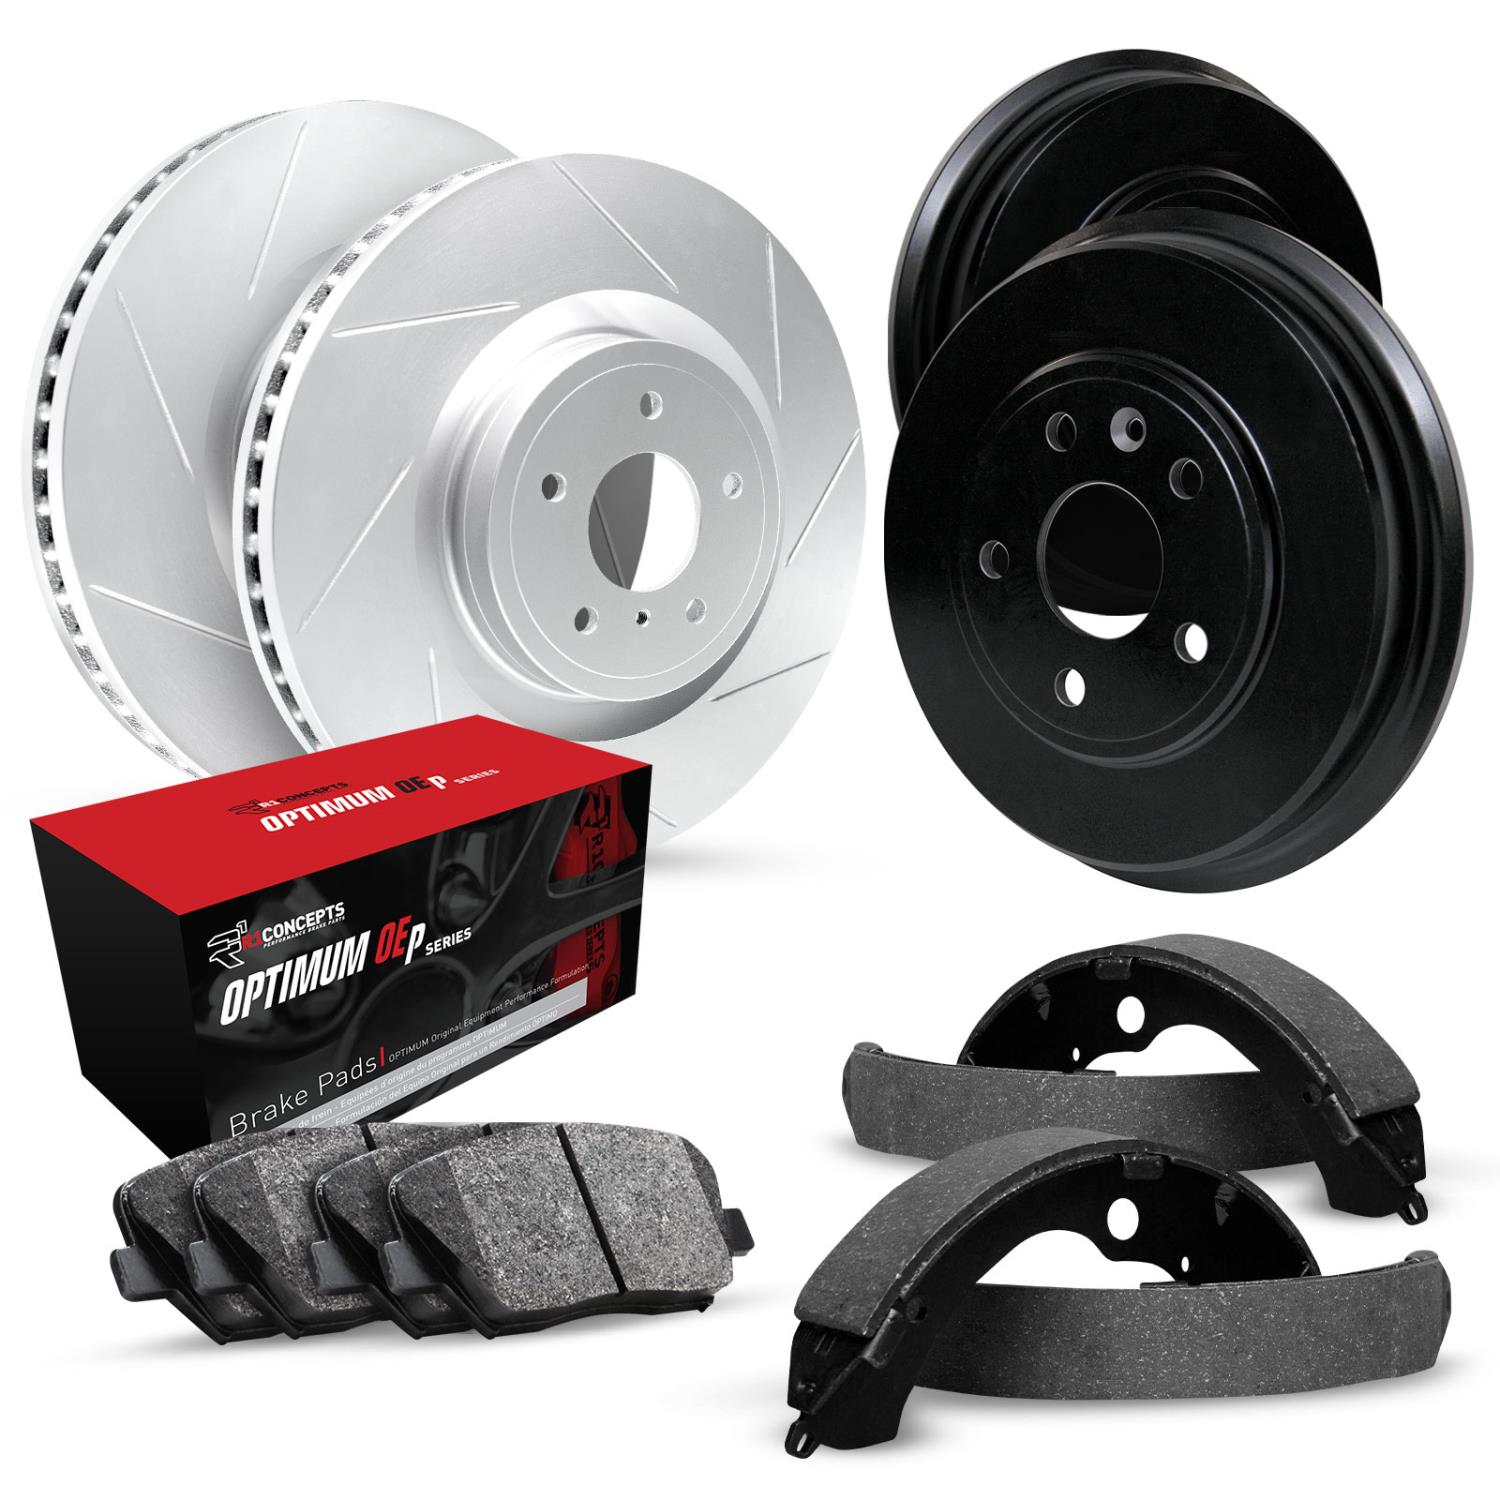 GEO-Carbon Slotted Brake Rotor & Drum Set w/Optimum OE Pads & Shoes, 1986-1986 Ford/Lincoln/Mercury/Mazda